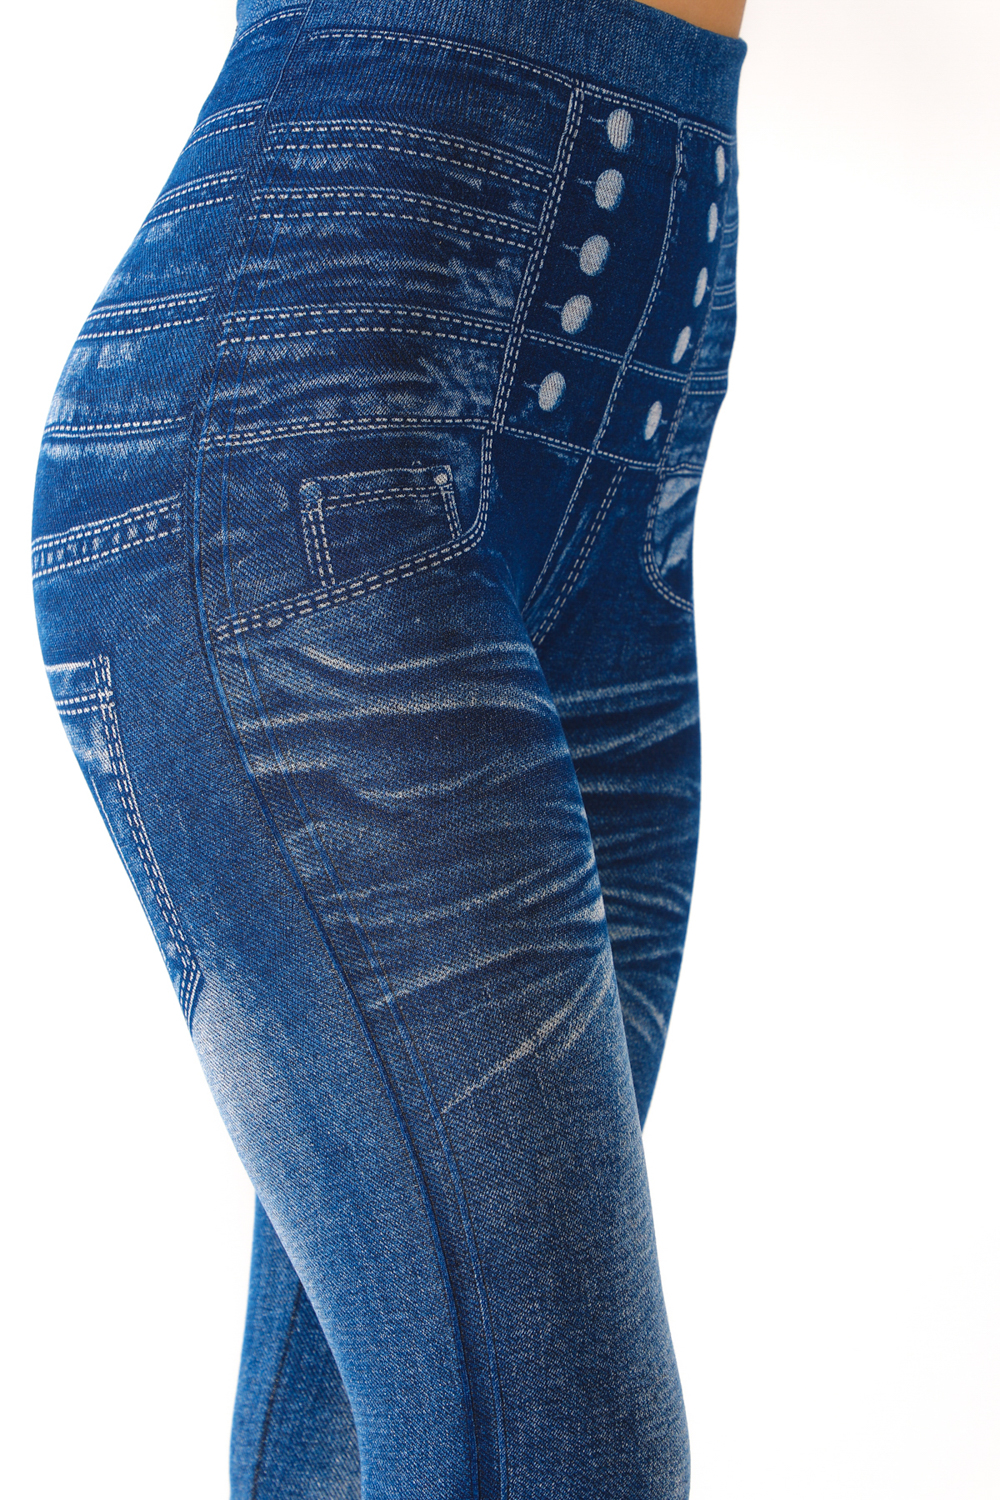 Faux Jeans Leggings with Fake Pockets and Buttons Pattern - Its All Leggings